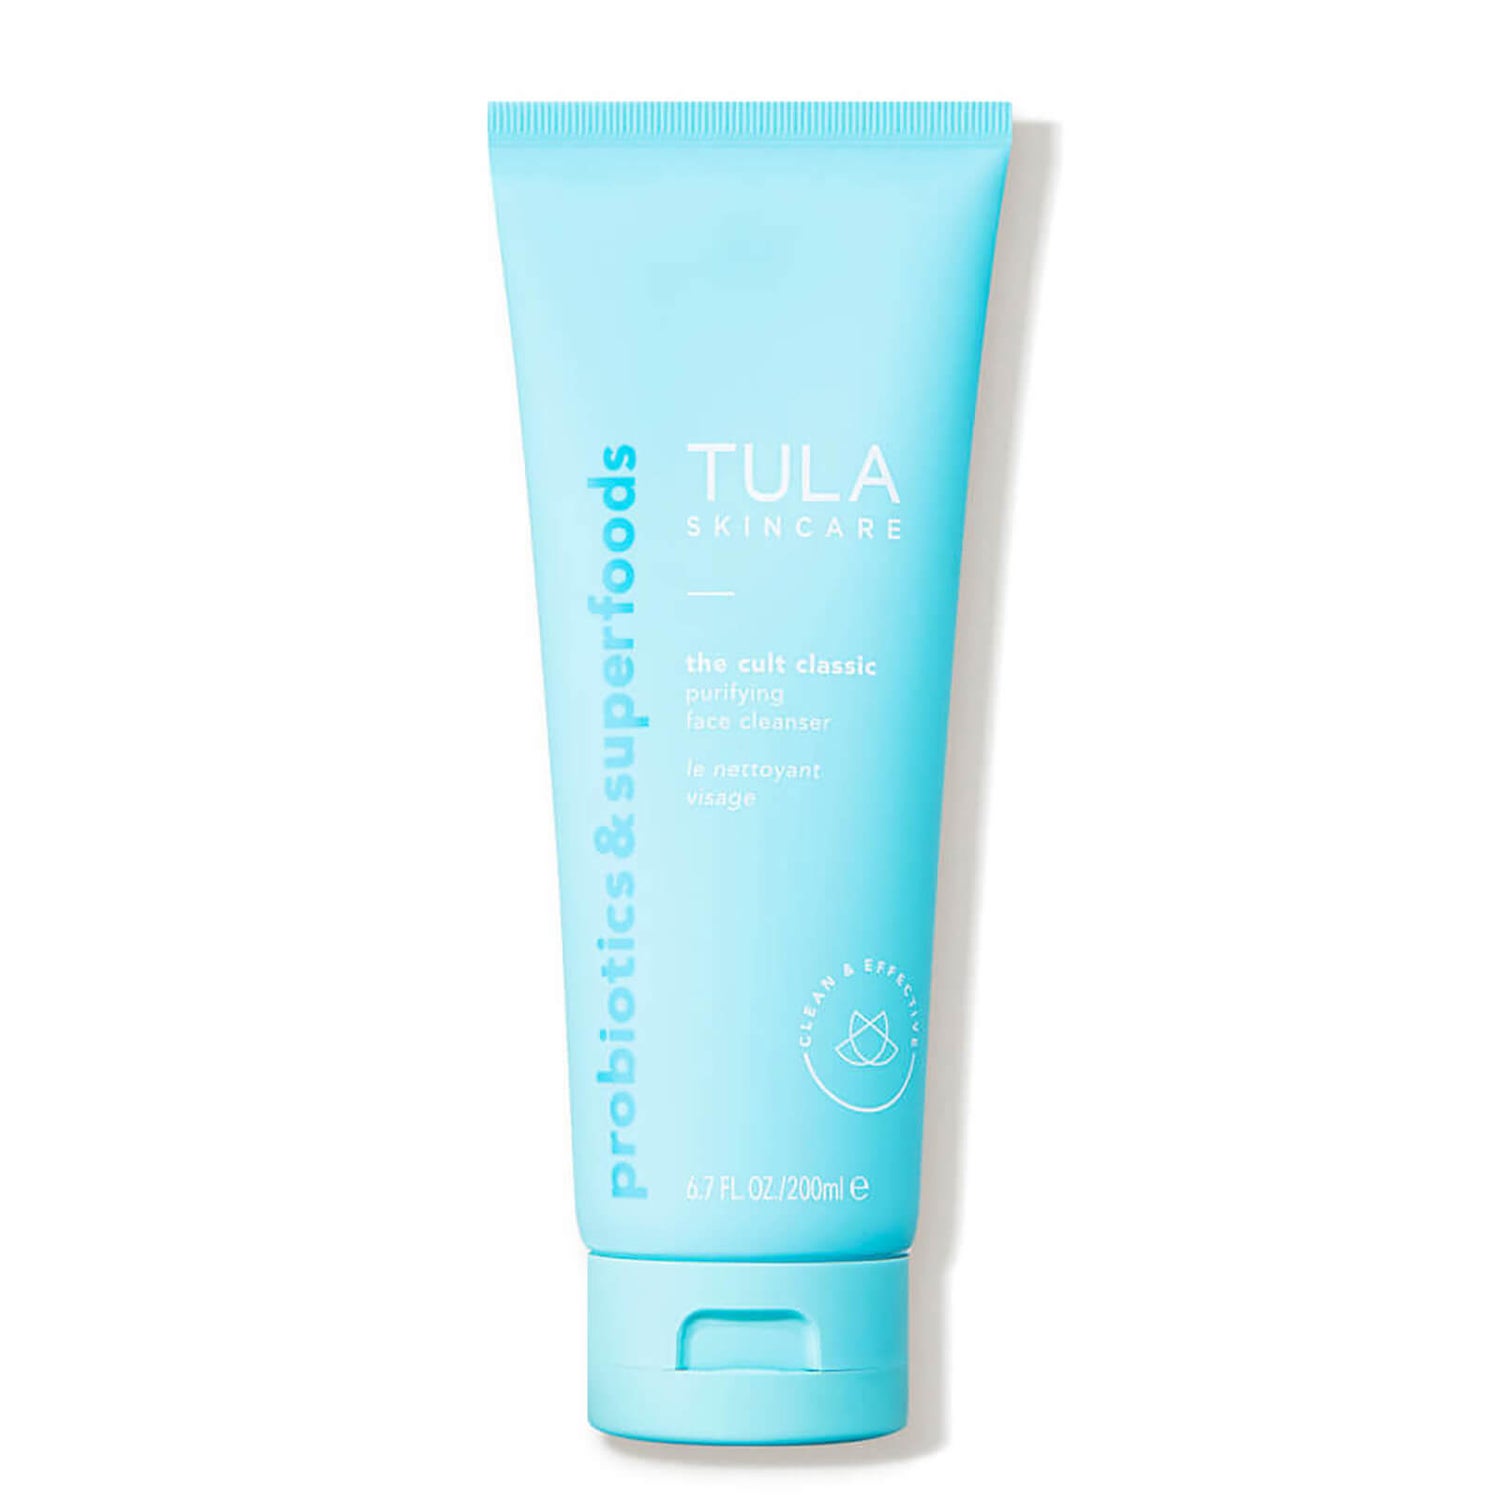 TULA Skincare The Cult Classic Purifying Face Cleanser (6.7 fl. oz.) - Dermstore